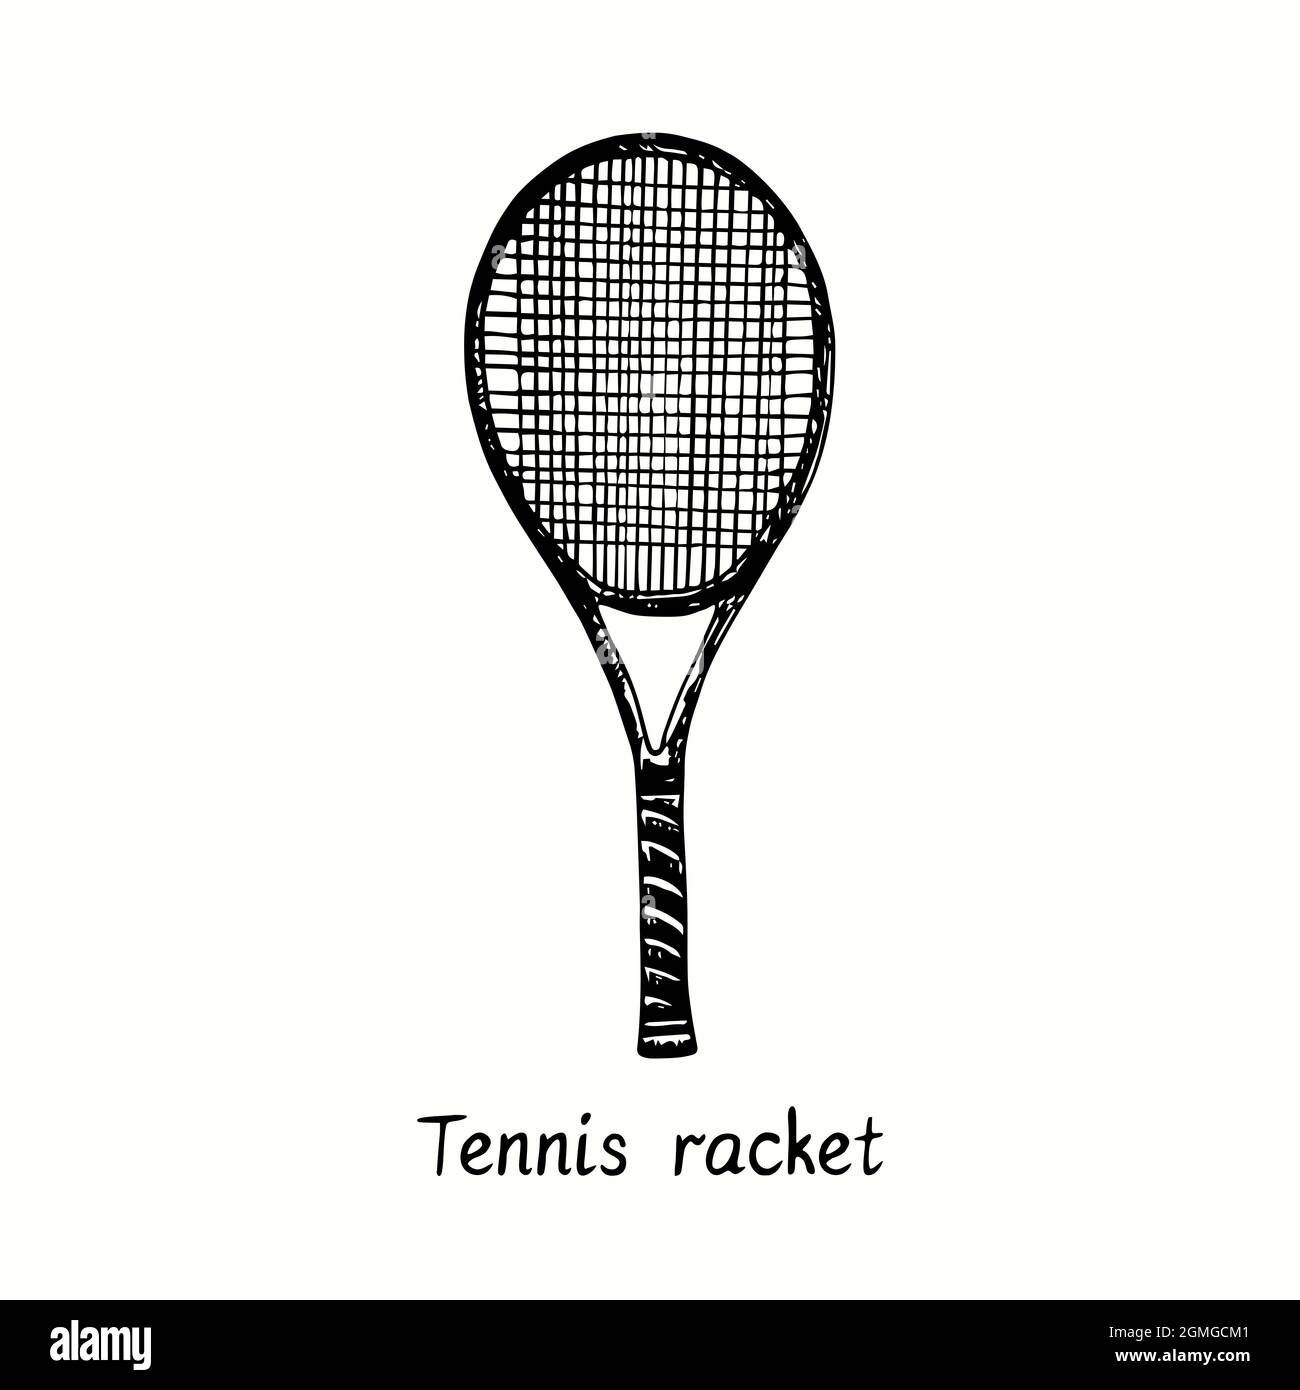 Tennis racket. Ink black and white doodle drawing in woodcut style. Stock Photo